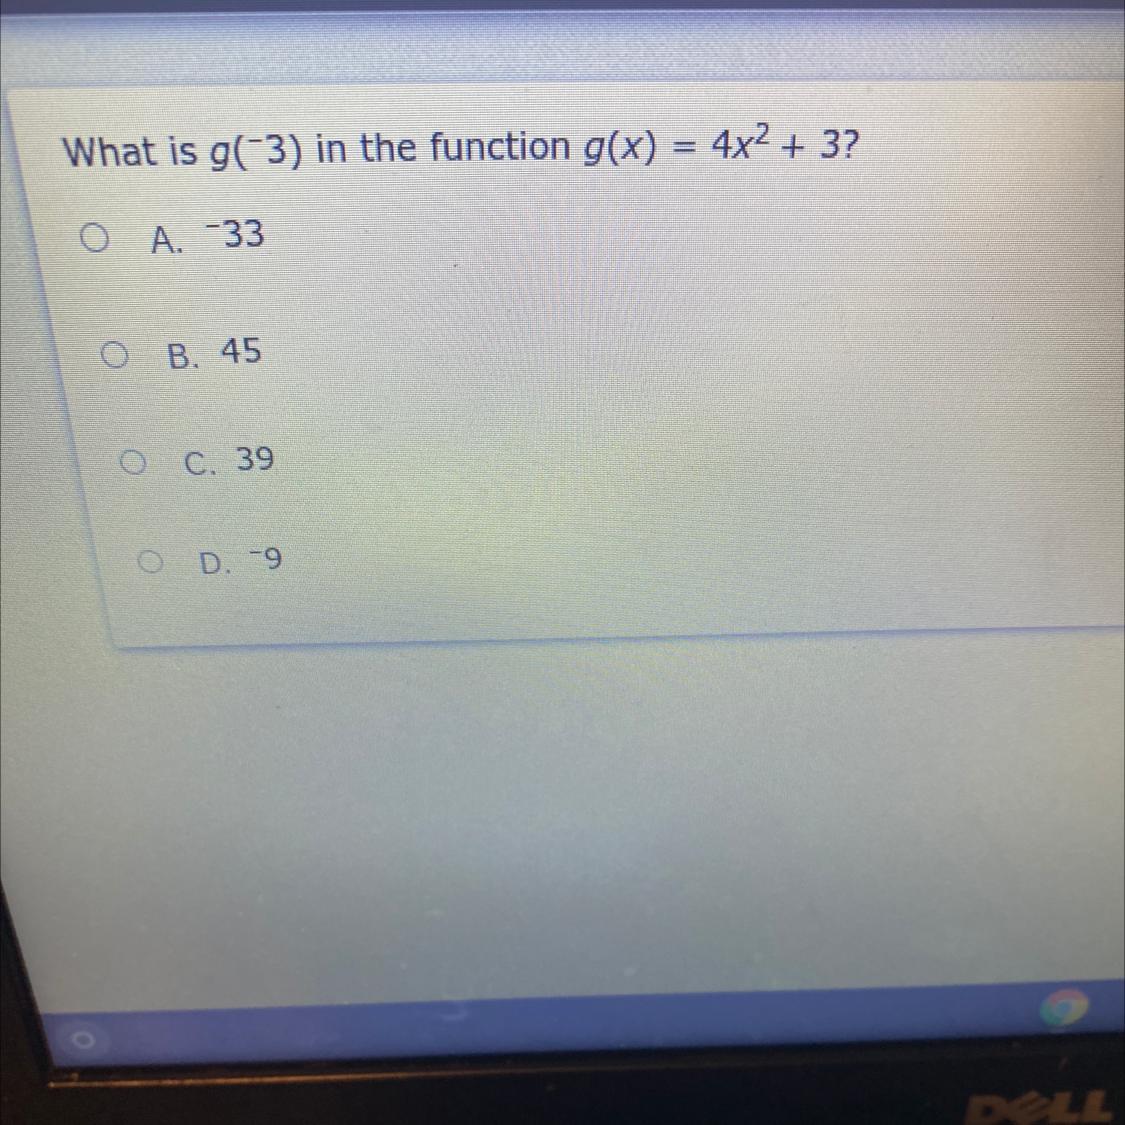 What Is G(-3) In The Function G(x) = 4x2 + 3? . - 33OB. 45 OC. 39O D. -9